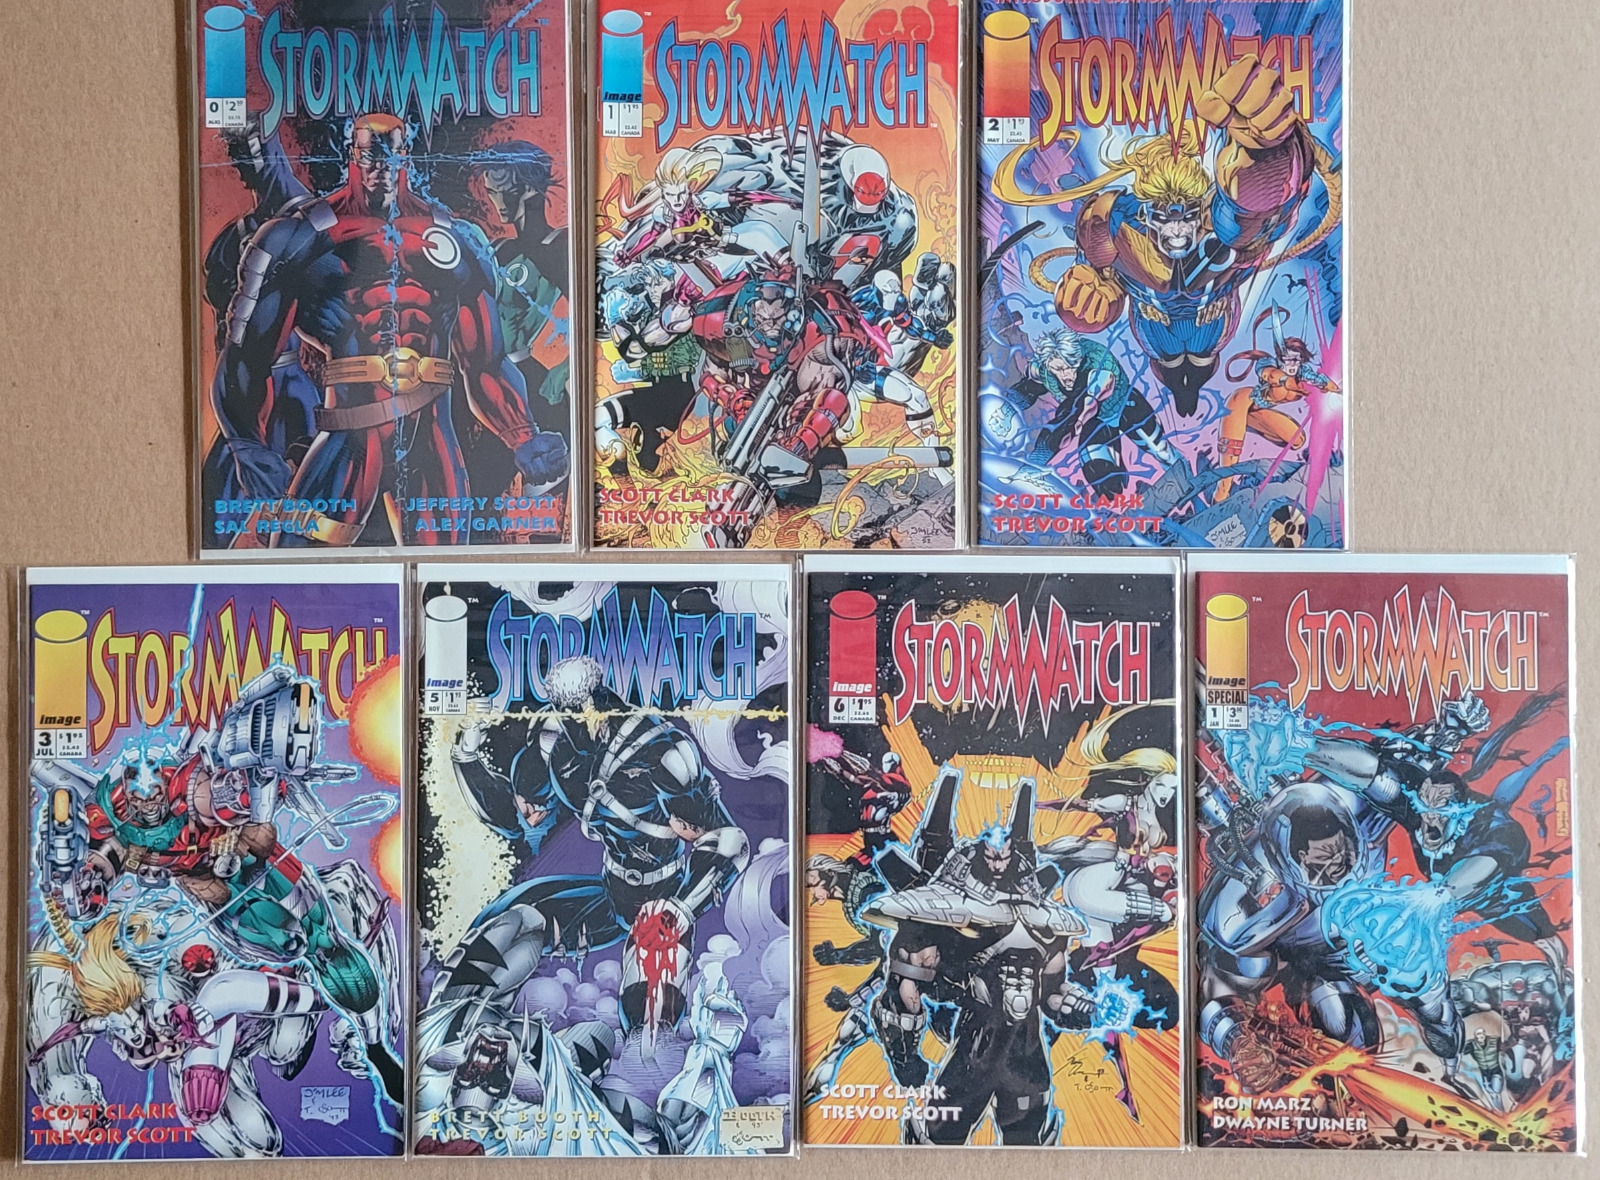 Stormwatch 0 1 2 3 5 6 and Special 1 Image Comics